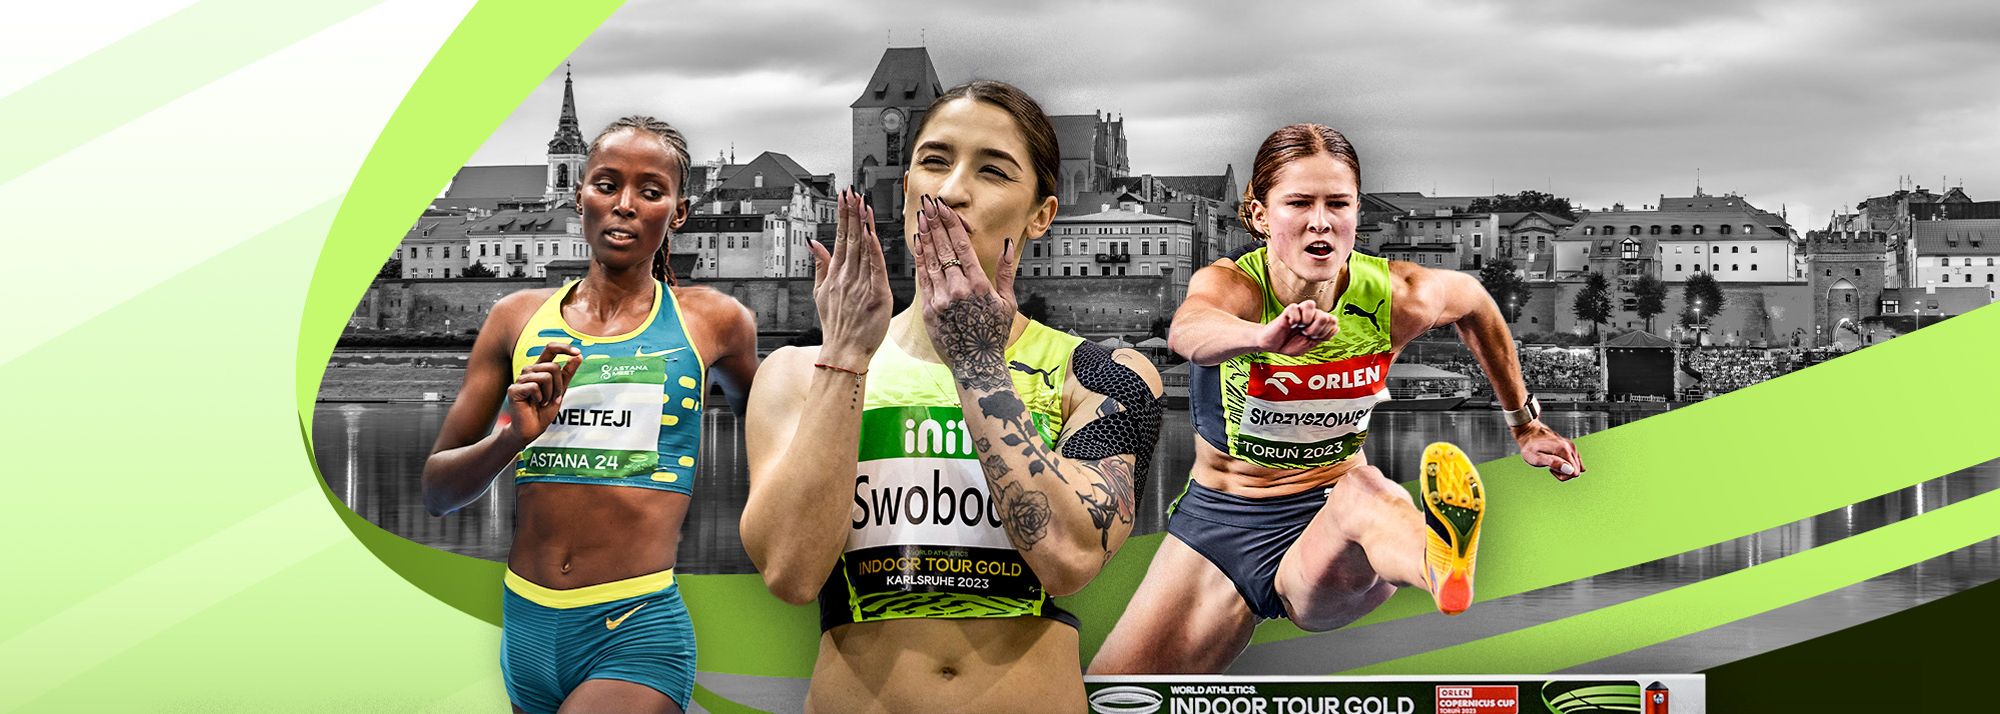 Here's how you can watch and follow the World Athletics Indoor Tour Gold meeting in Torun